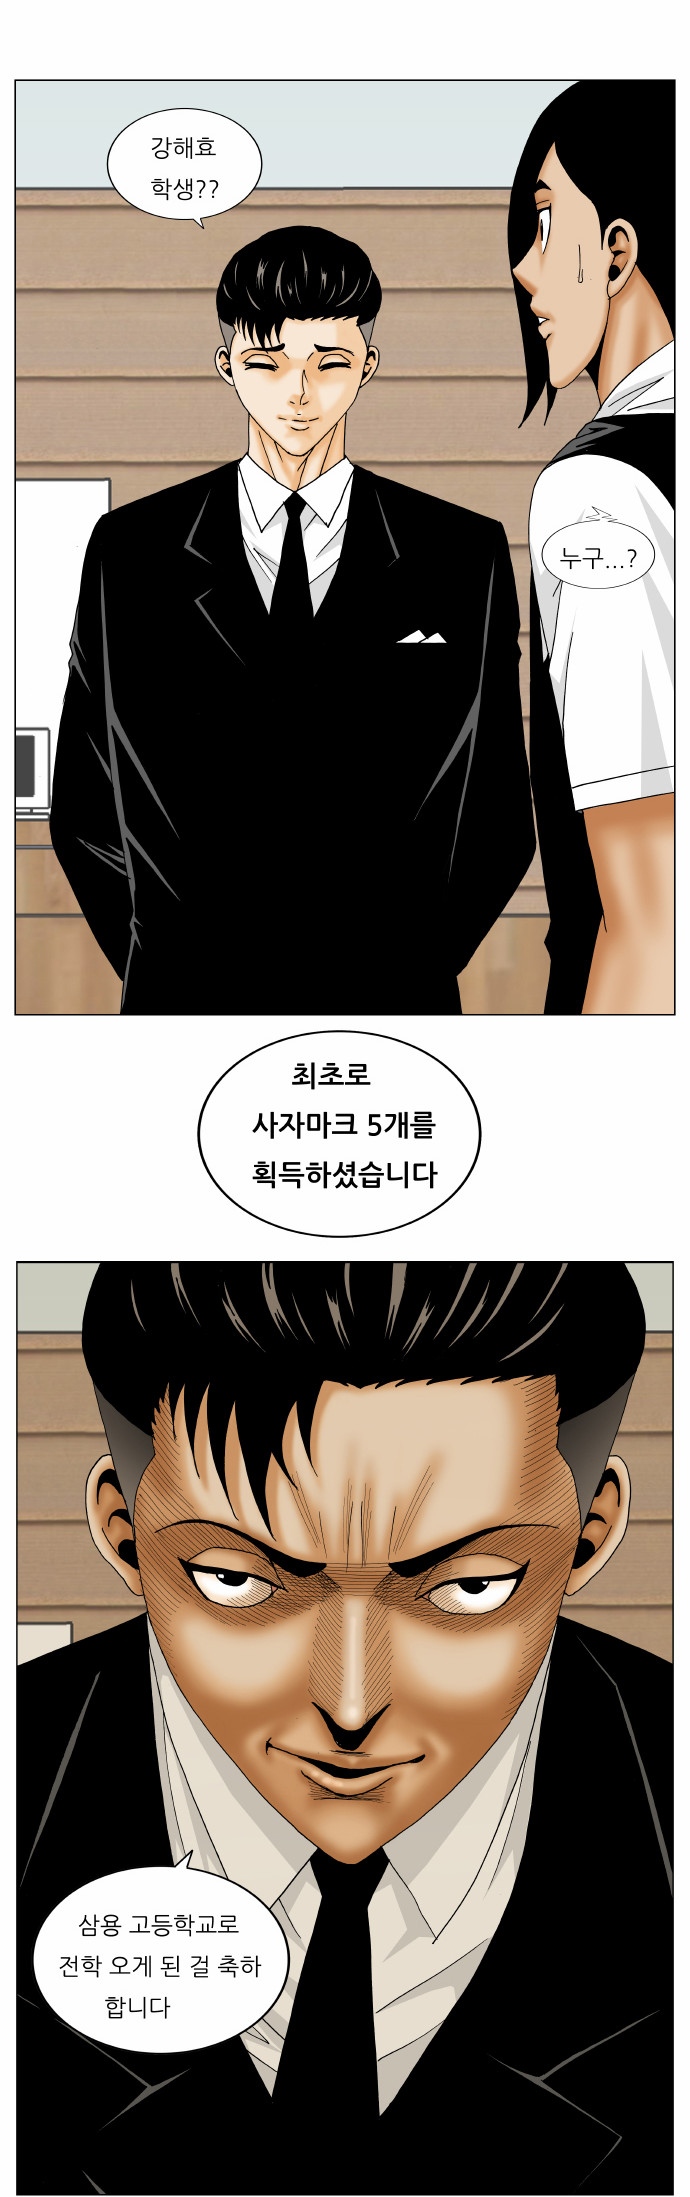 Ultimate Legend - Kang Hae Hyo - Chapter 161 - Page 2